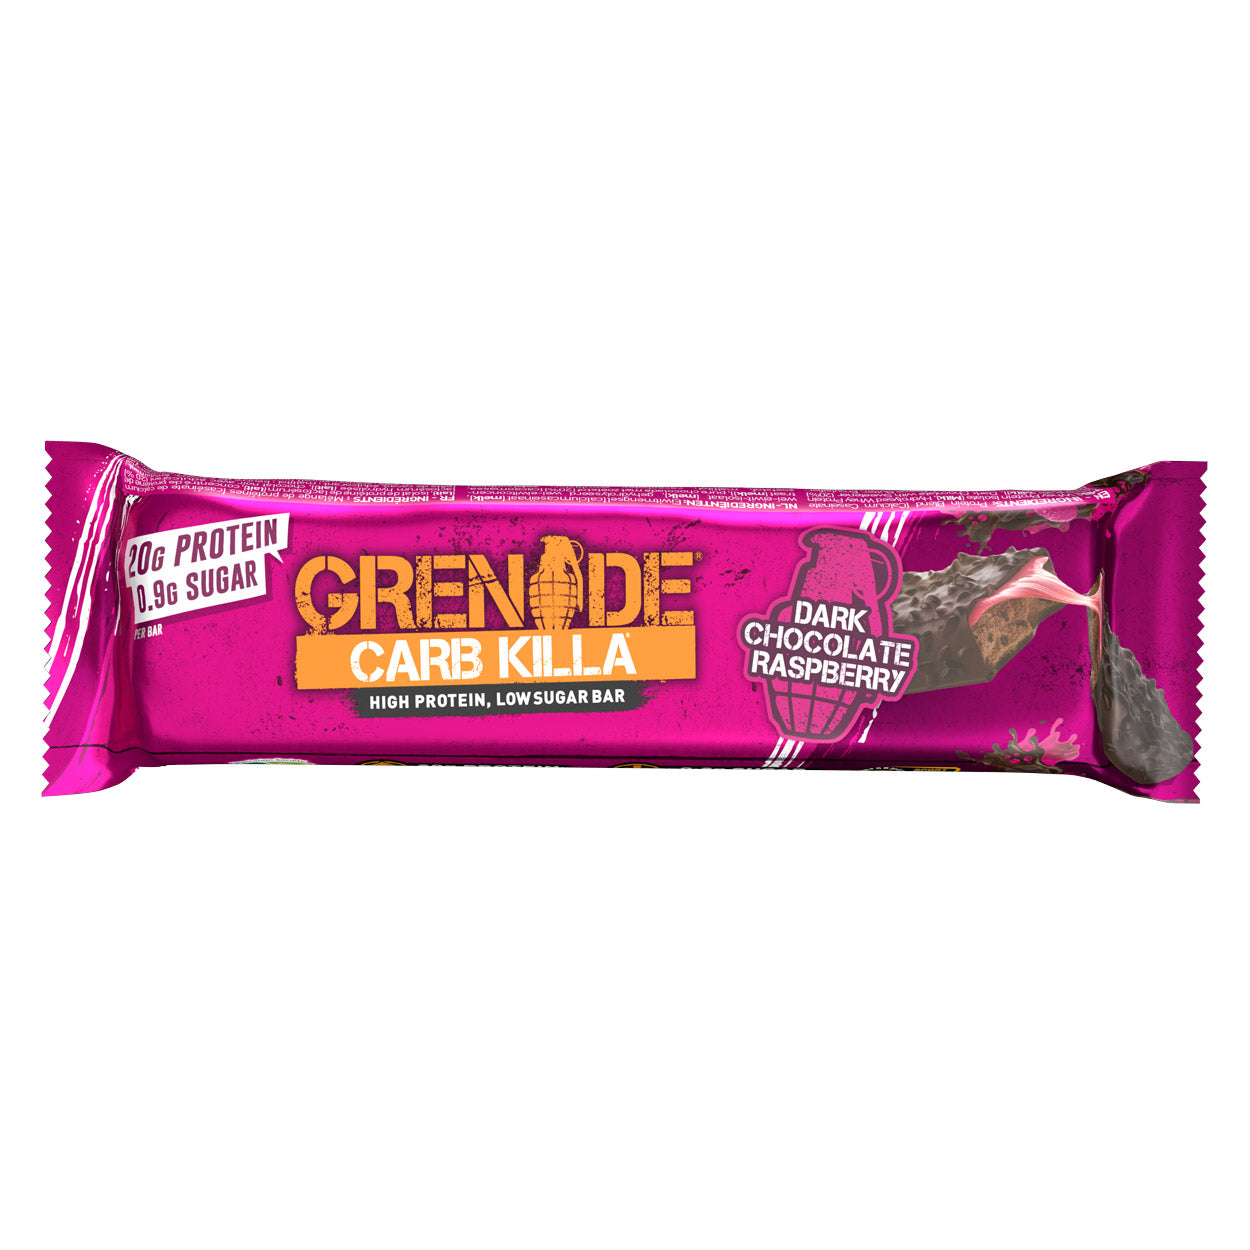 Grenade Carb Killa Keto Protein Bars (1 bar) Protein Snacks Cookies and Cream,White Chocolate Cookie,Dark Chocolate Mint,Fudge Brownie,Caramel Chaos,Peanut nutter,Chocolate Chip Cookie Dough,Birthday Cake,White Chocolate Salted Peanut,Dark Chocolate Raspberry,Chocolate Cream *LIMITED EDITION*,Chocolate Chip Salted Caramel,Strawberry Ice Cream,Apple Rumble,Fudged Up,Gingerbread *LIMITED EDITION*,Peanut Butter & Jelly,LIMITED EDITION Lemon Cheesecake,OREO (Official Collab) Grenade